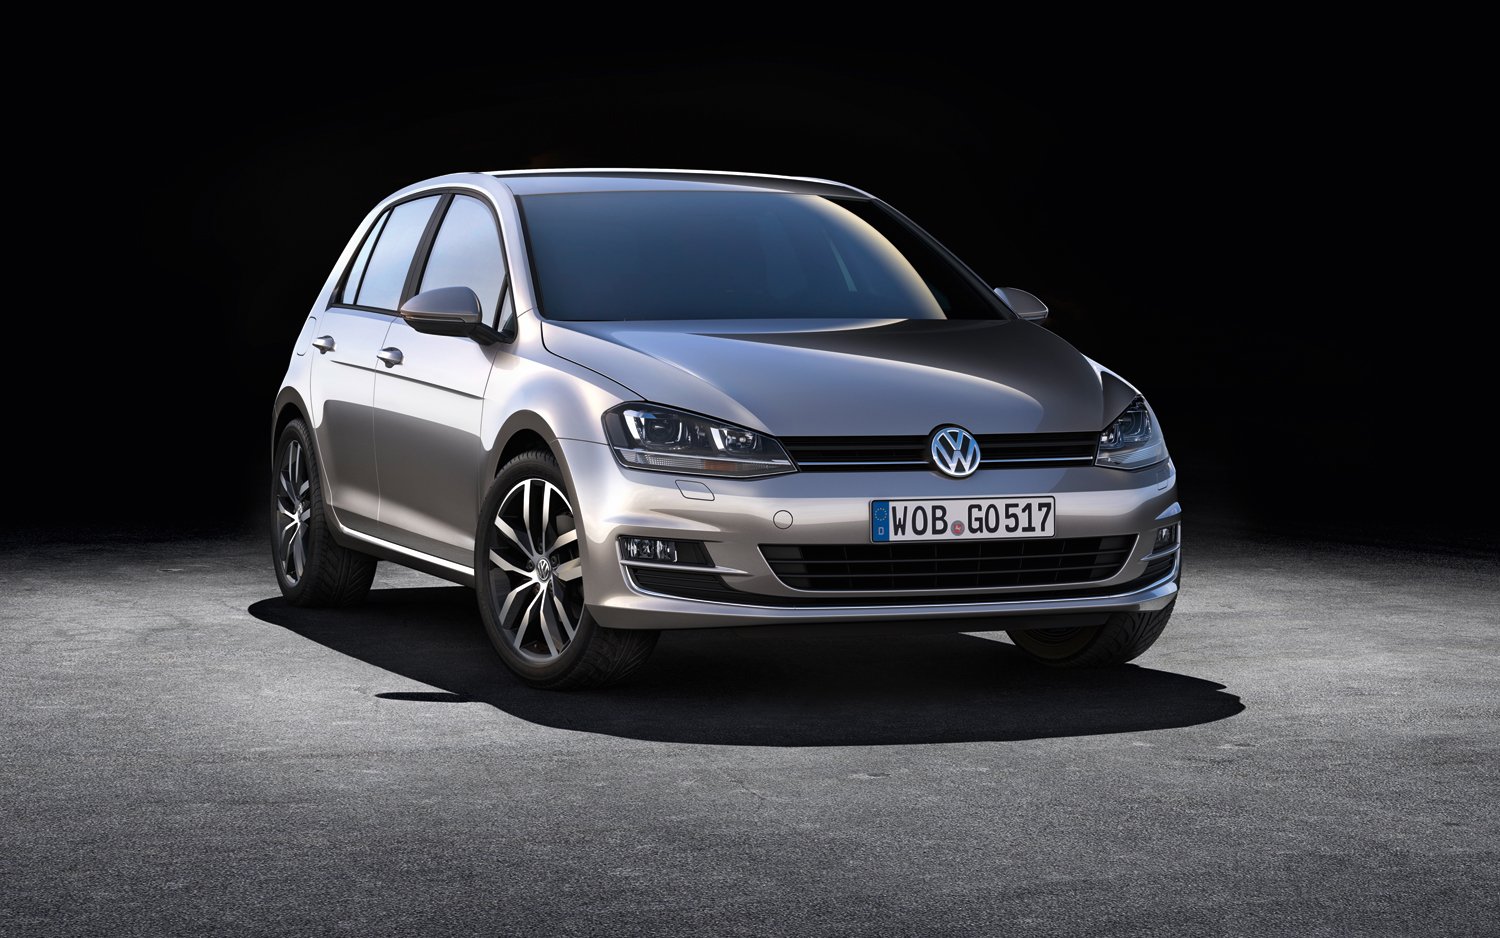 2014 Volkswagen Golf Hd wallpapers New cars reviews 1500x938